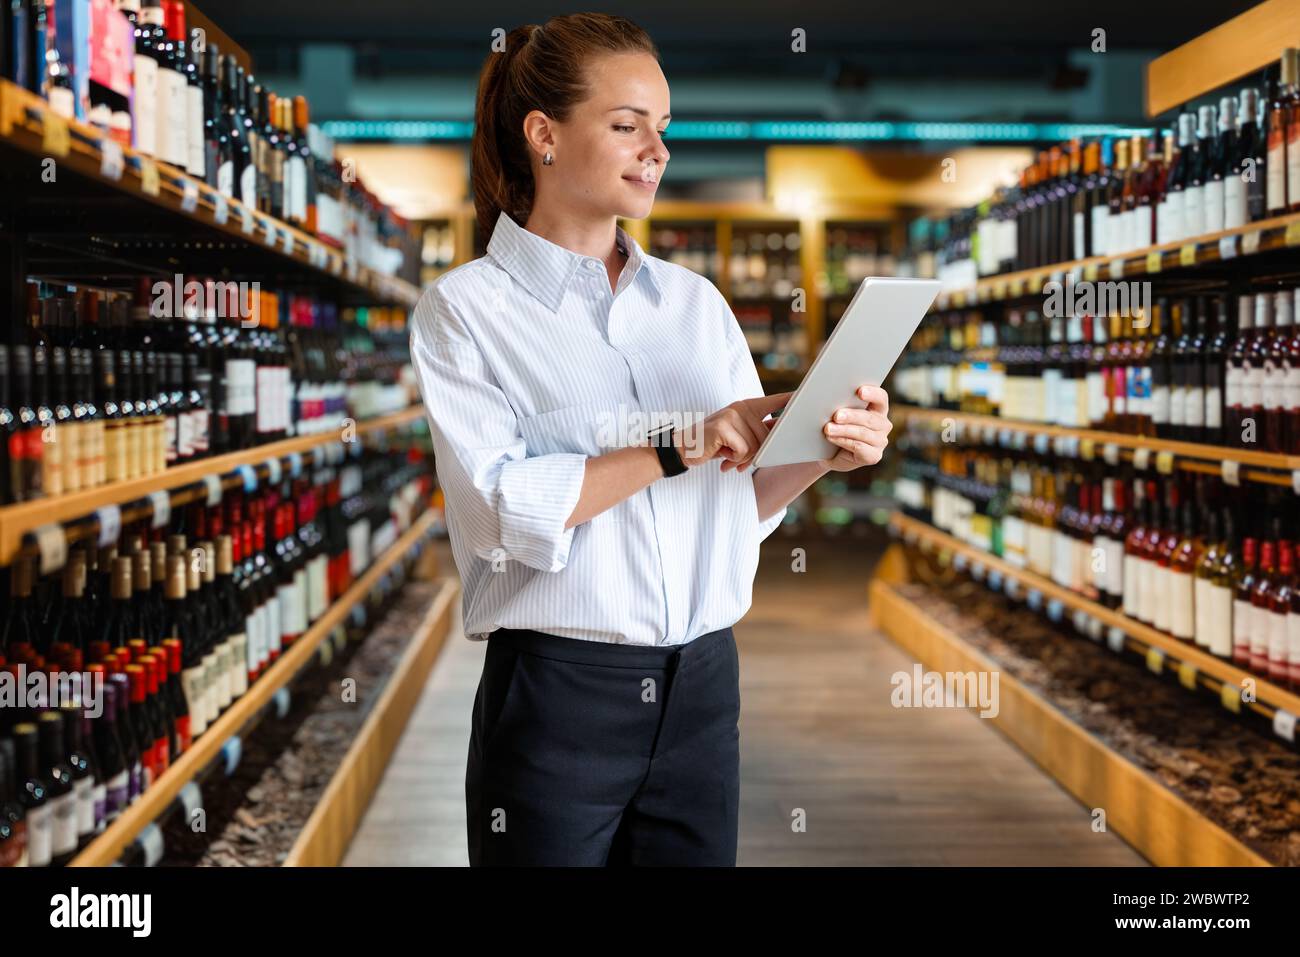 Businesswoman retail manager working on her digital tablet while standing in the wine shop sales area. Stock Photo